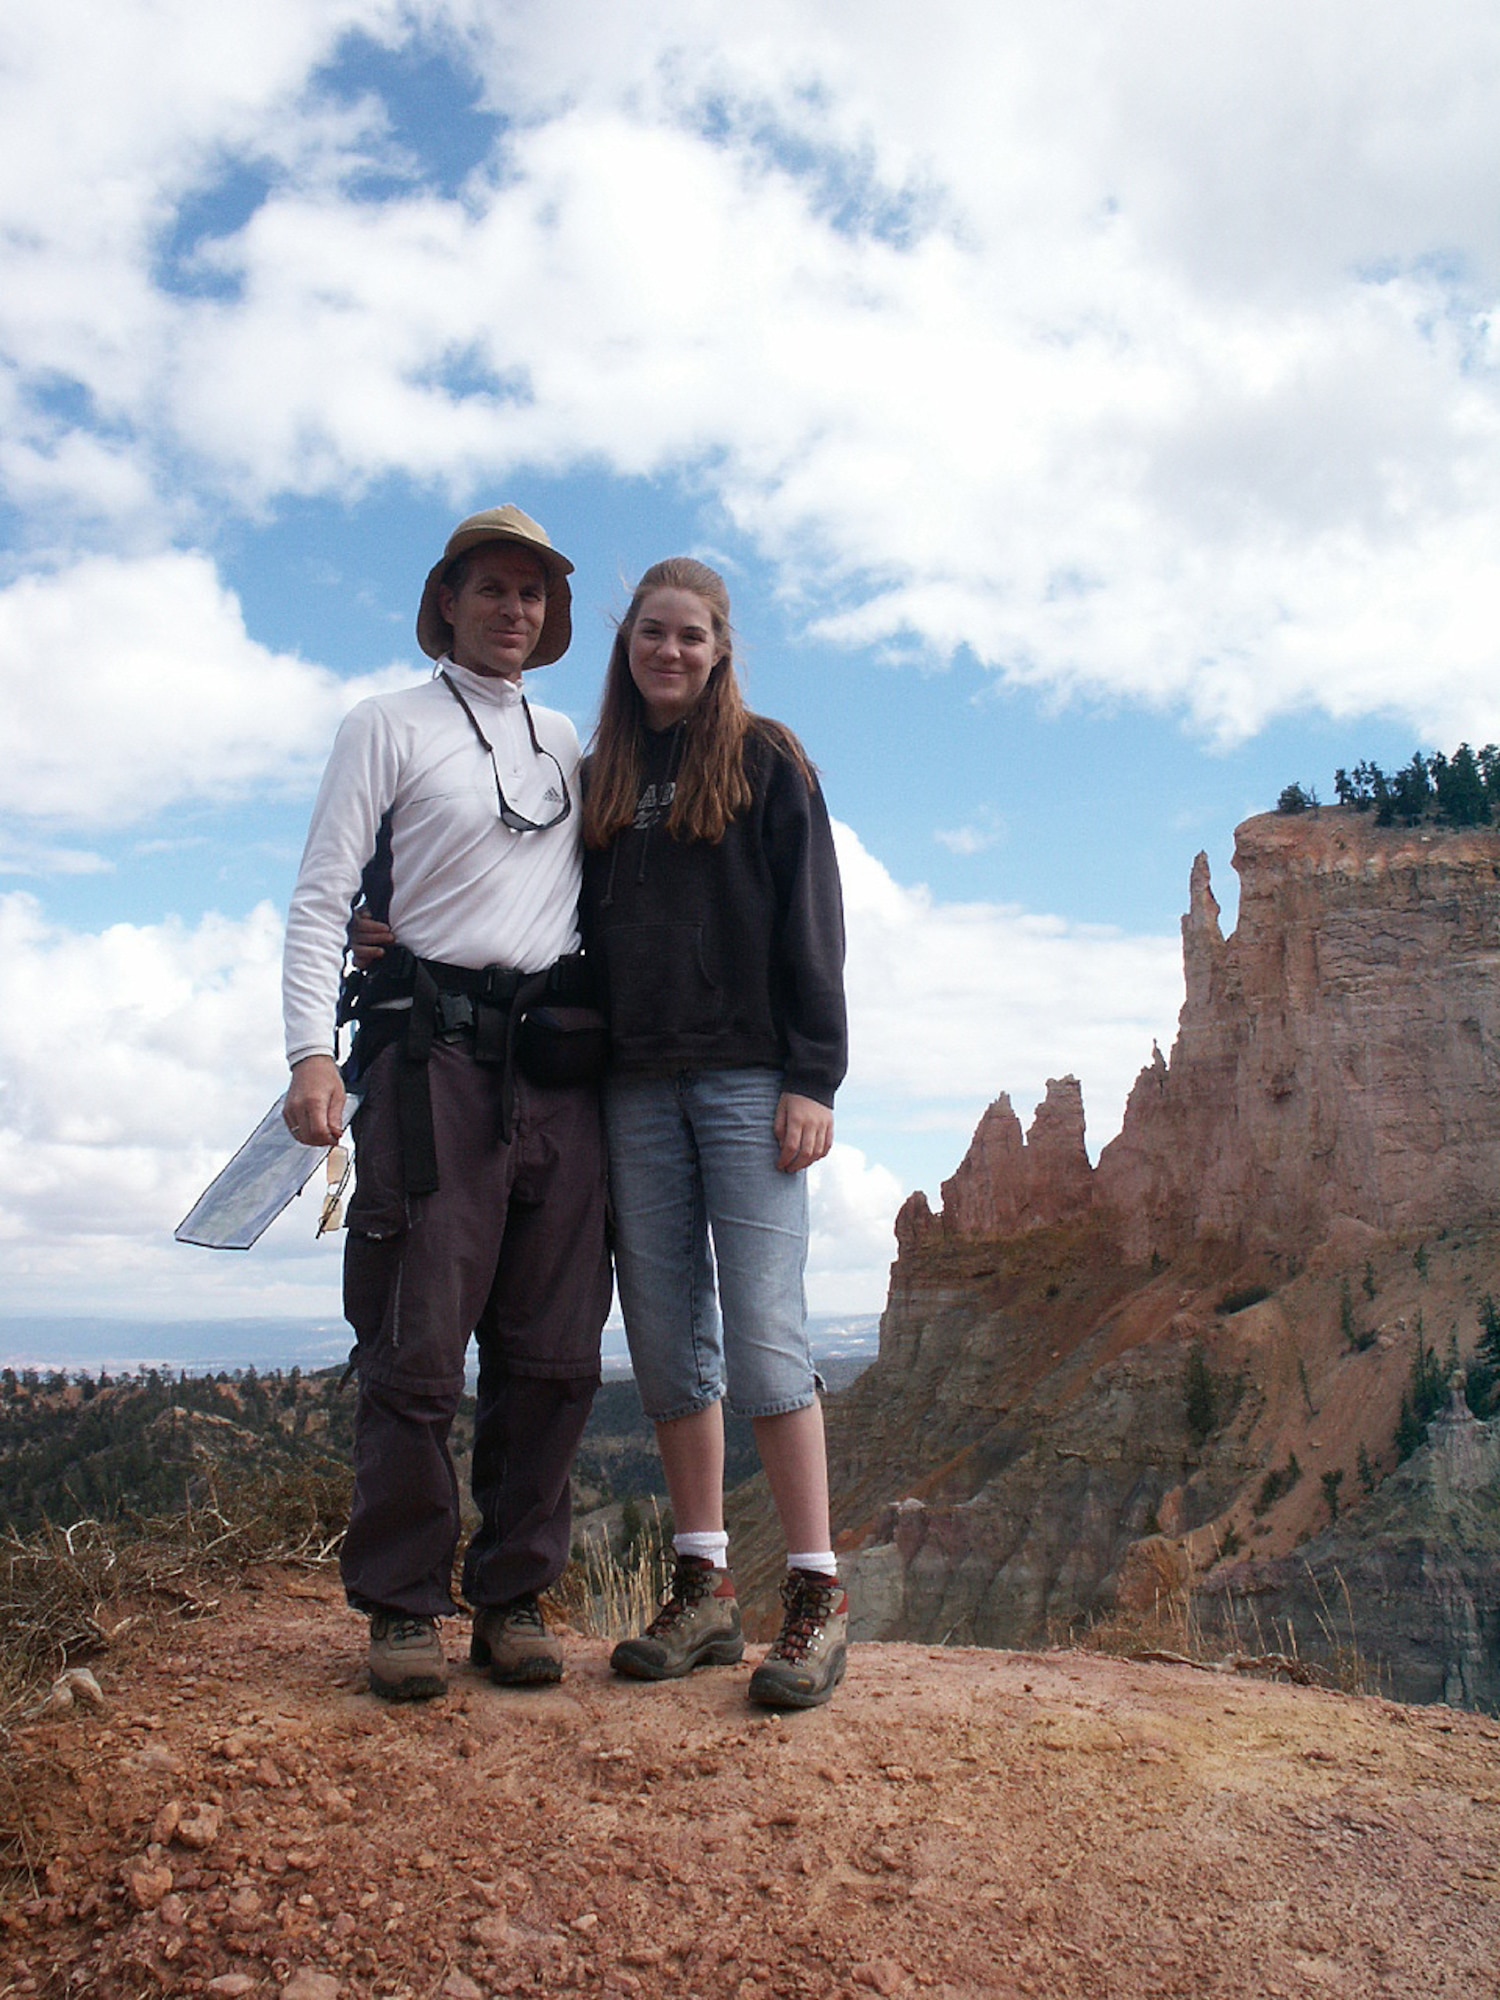 Jon Warnick and Jette Carr pose for a photo in Bryce Canyon during their walk across the state, summer of 2003.  The hike was part of a trek spanning from the bottom to the top of Utah to each boarder – a journey that took 43 days and was nearly 700 miles long.  (Courtesy photo)